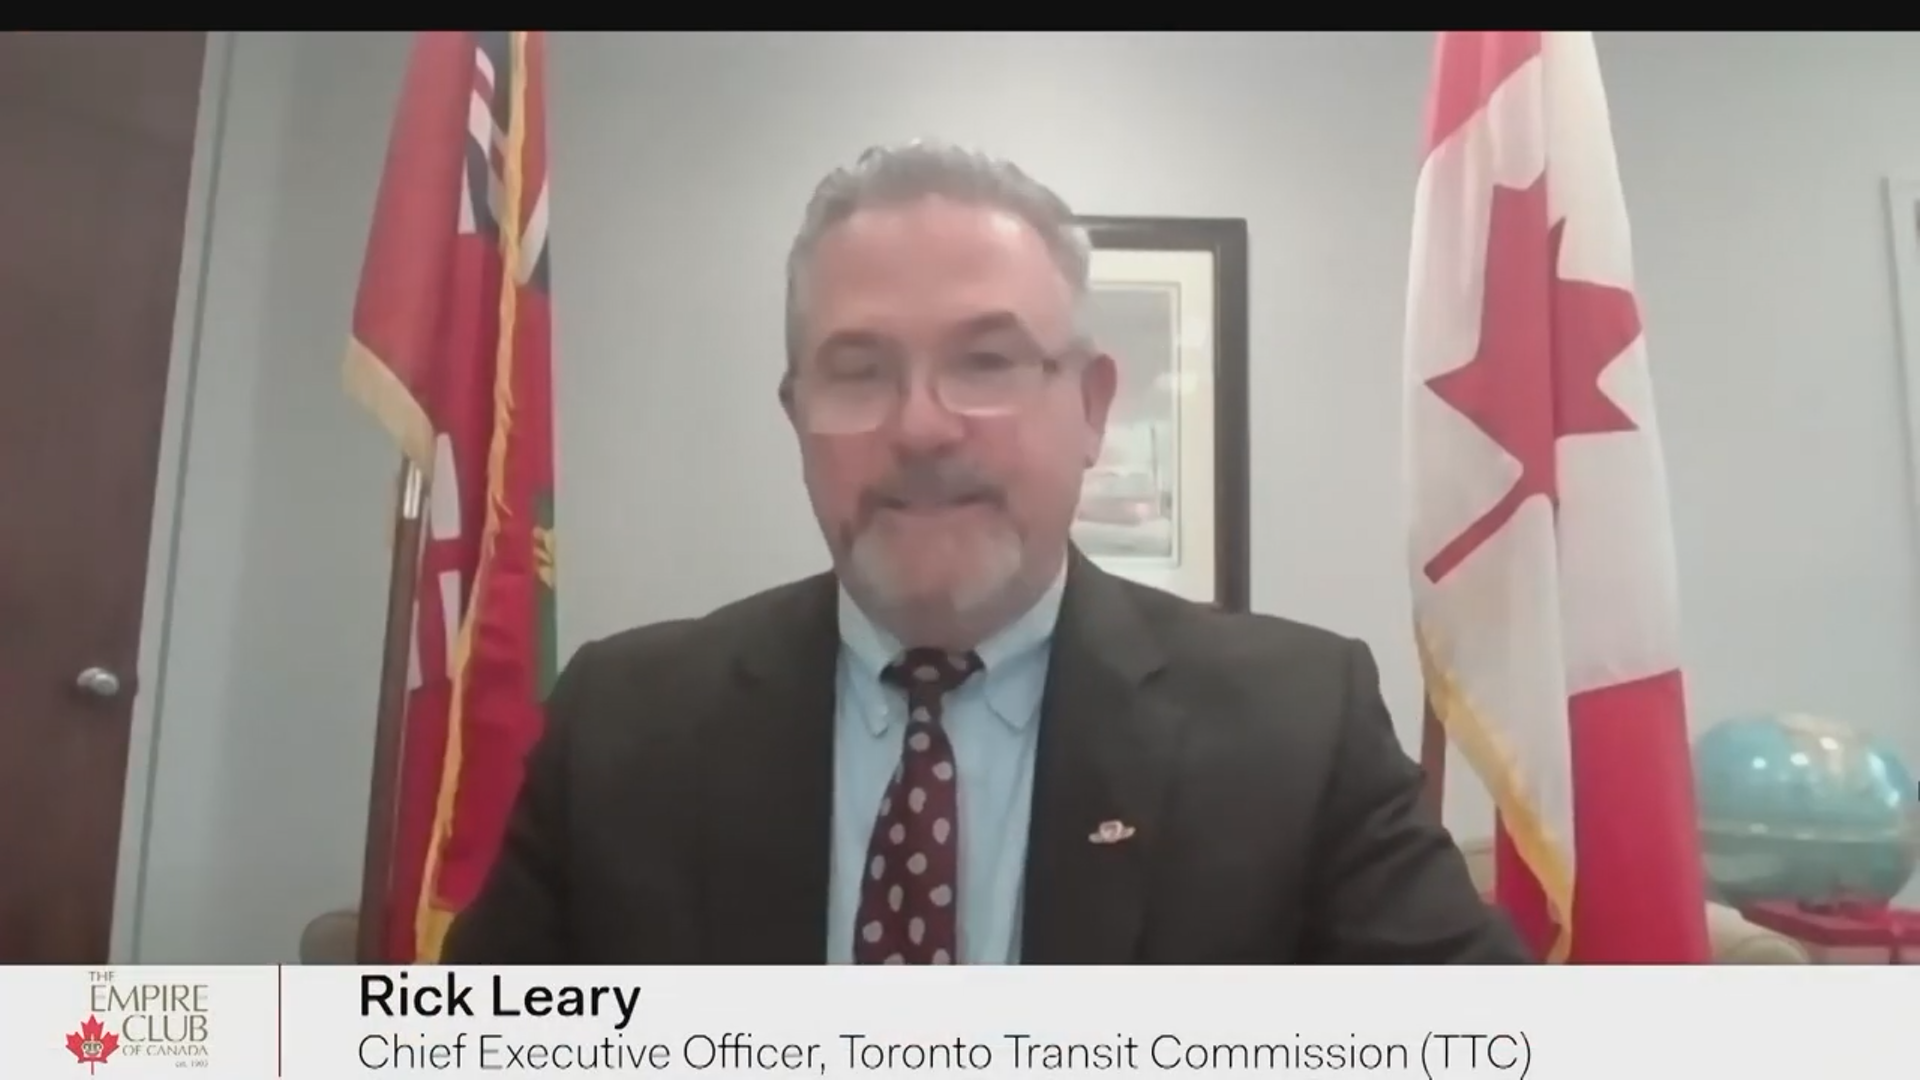 Rick Leary, CEO of TTC speaking at a vitural event